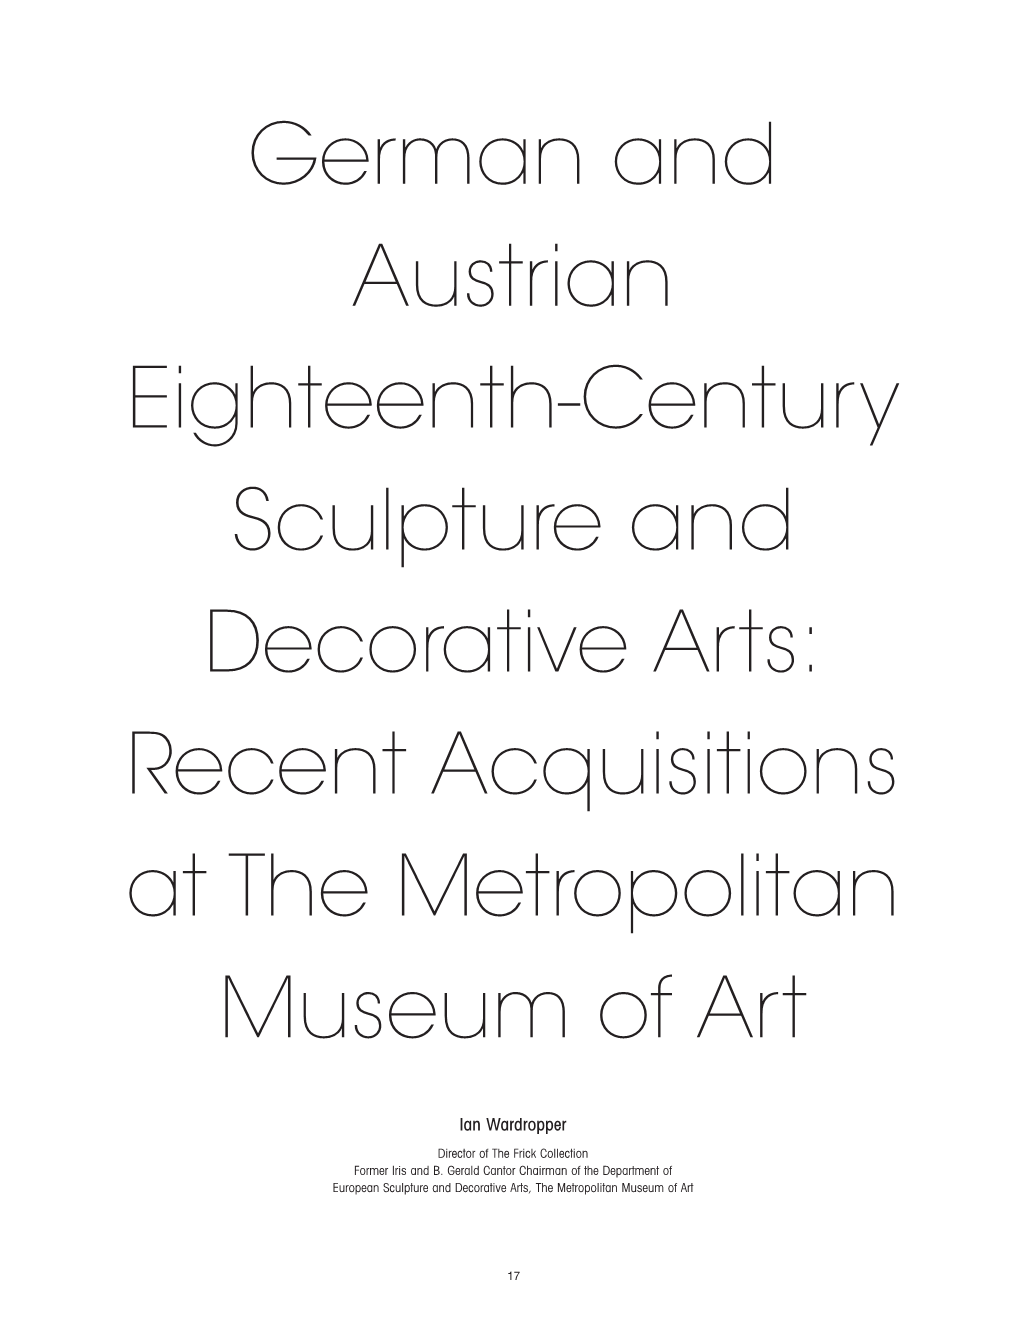 German and Austrian Eighteenth-Century Sculpture and Decorative Arts: Recent Acquisitions at the Metropolitan Museum of Art